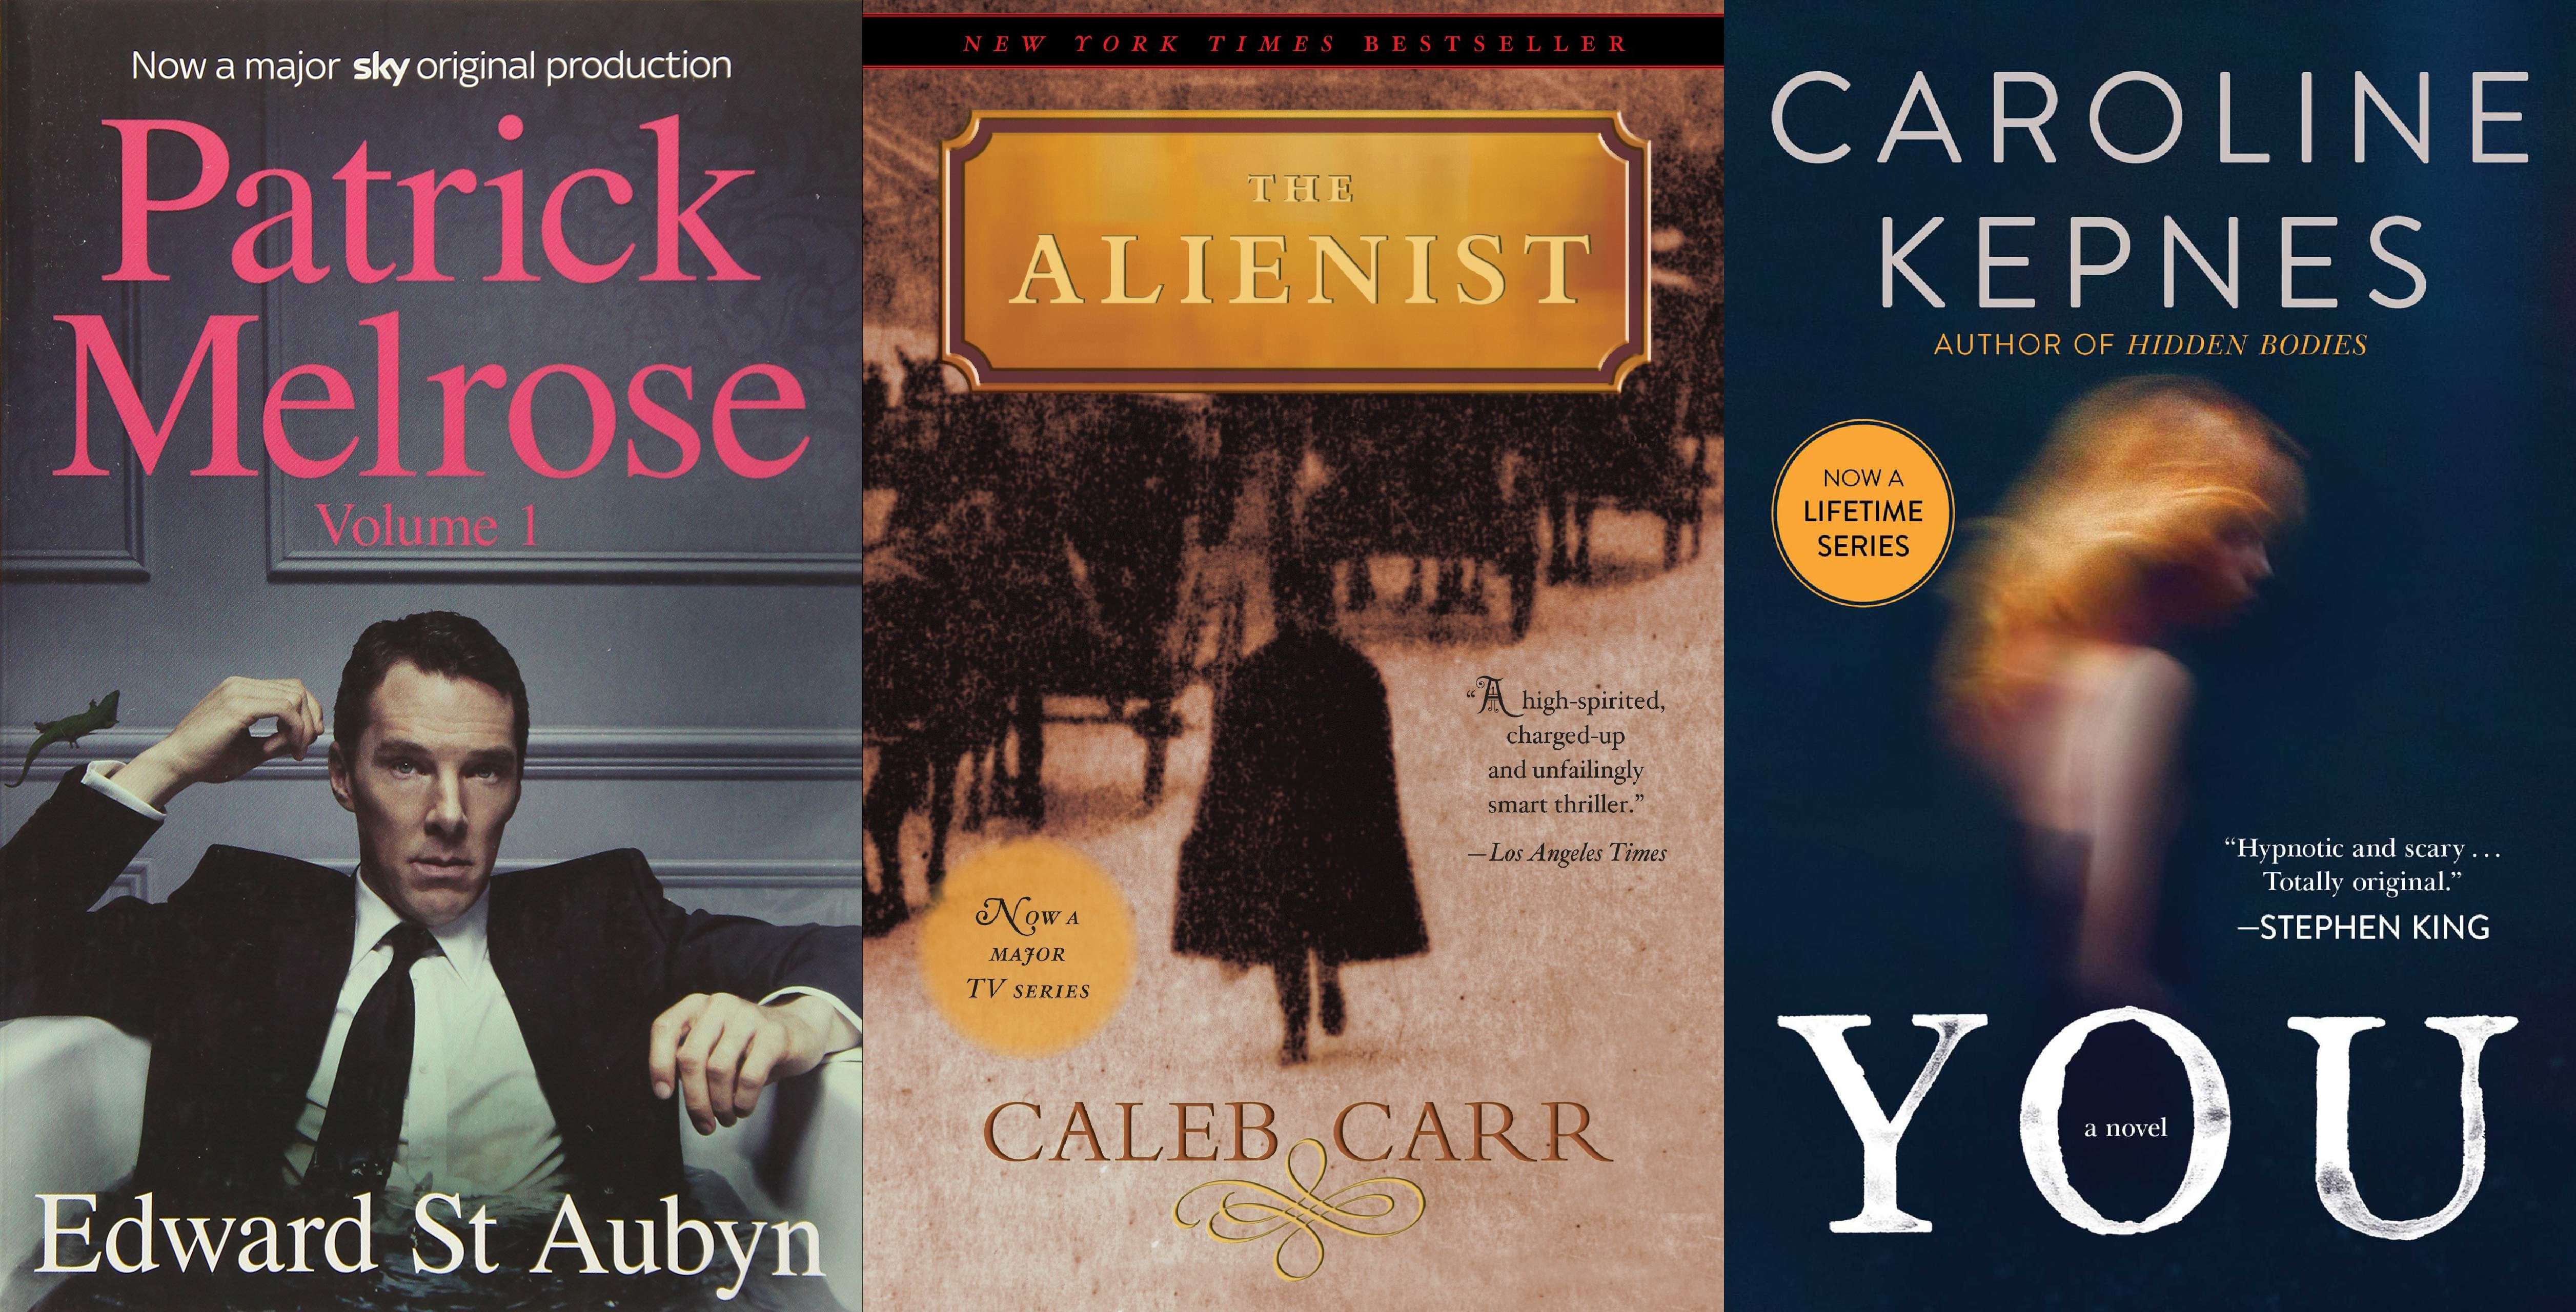 Collection of three book covers from various genres: "patrick melrose volume i" by edward st aubyn, a drama series, "the alienist" by caleb carr, a historical mystery, and "you" by caroline kepnes, a psychological thriller adapted into a tv series.